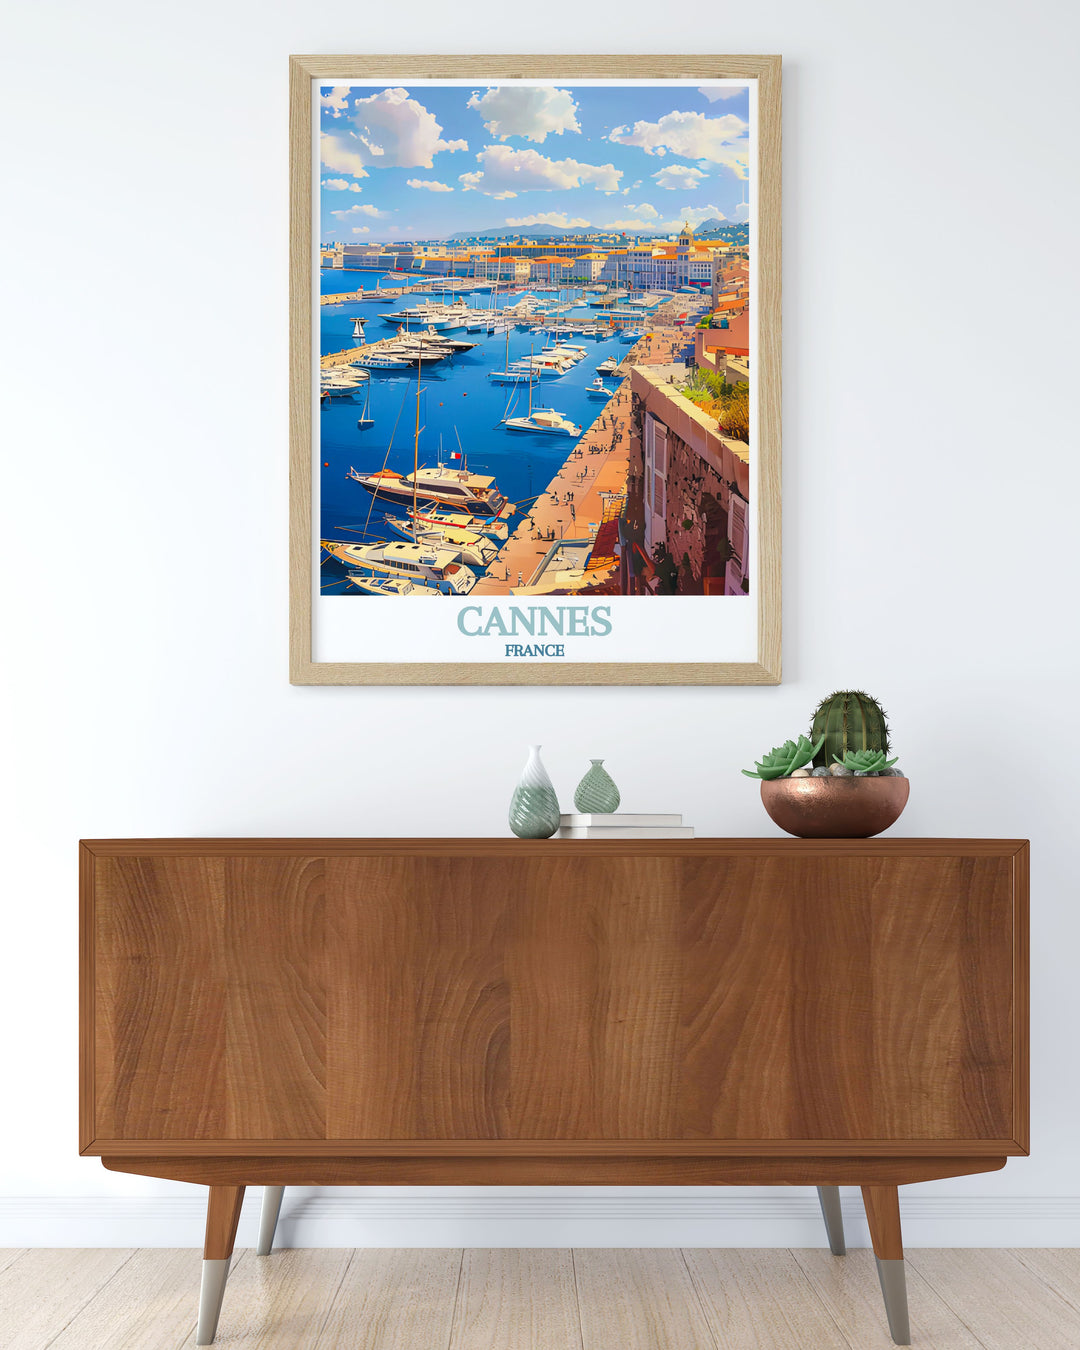 Elegant Le Vieux Port artwork featuring the picturesque beauty of Cannes this France art print brings the charm and sophistication of French culture into your home a stunning piece of France travel art for your collection ideal for enhancing any interior space